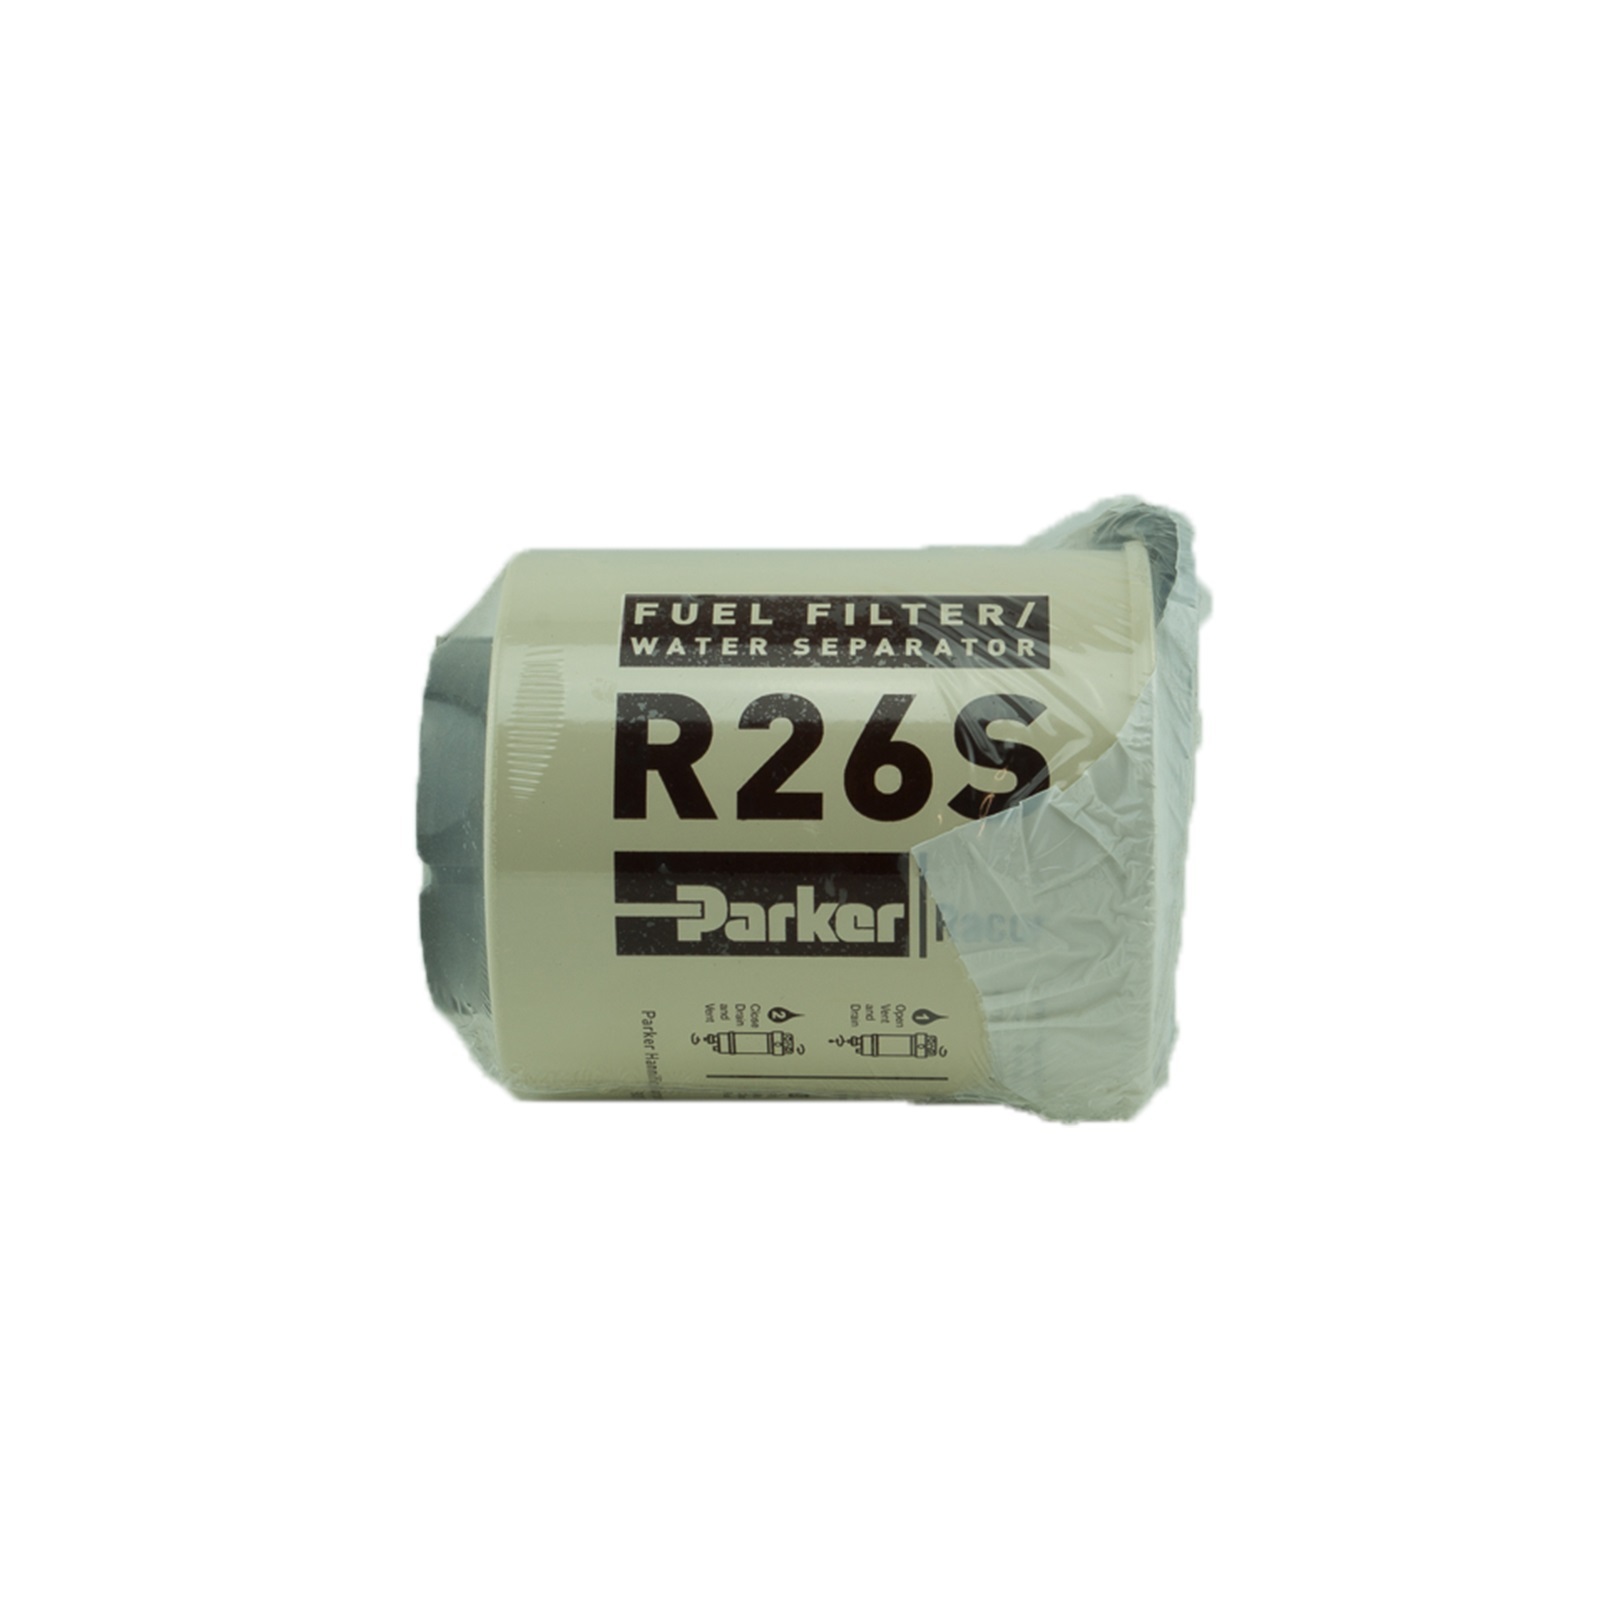 Genuine Racor R26T 10-Micron, Fuel Filter Element for Racor 225R Assembley